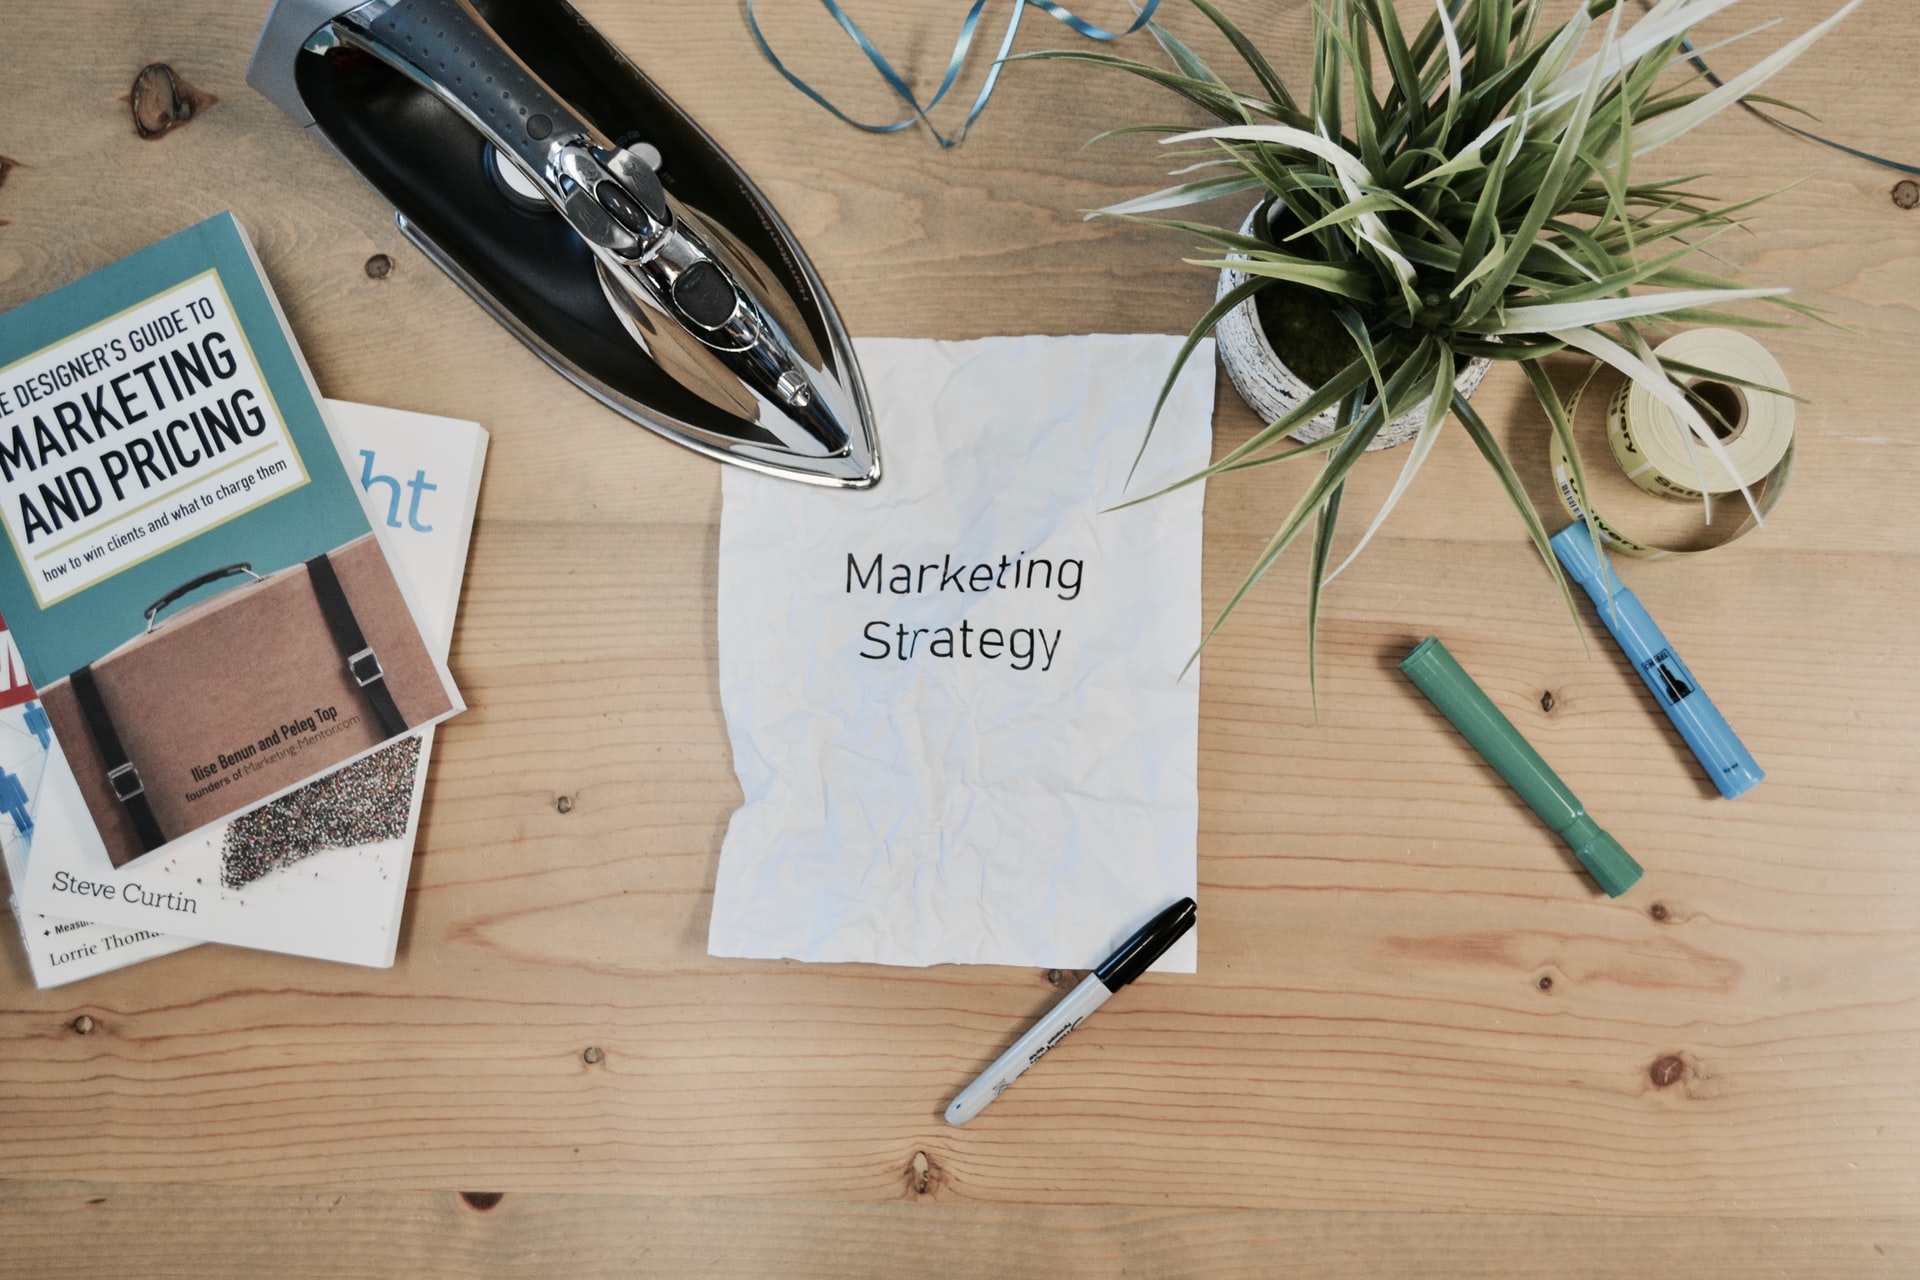 You need a strategy to market your product or service